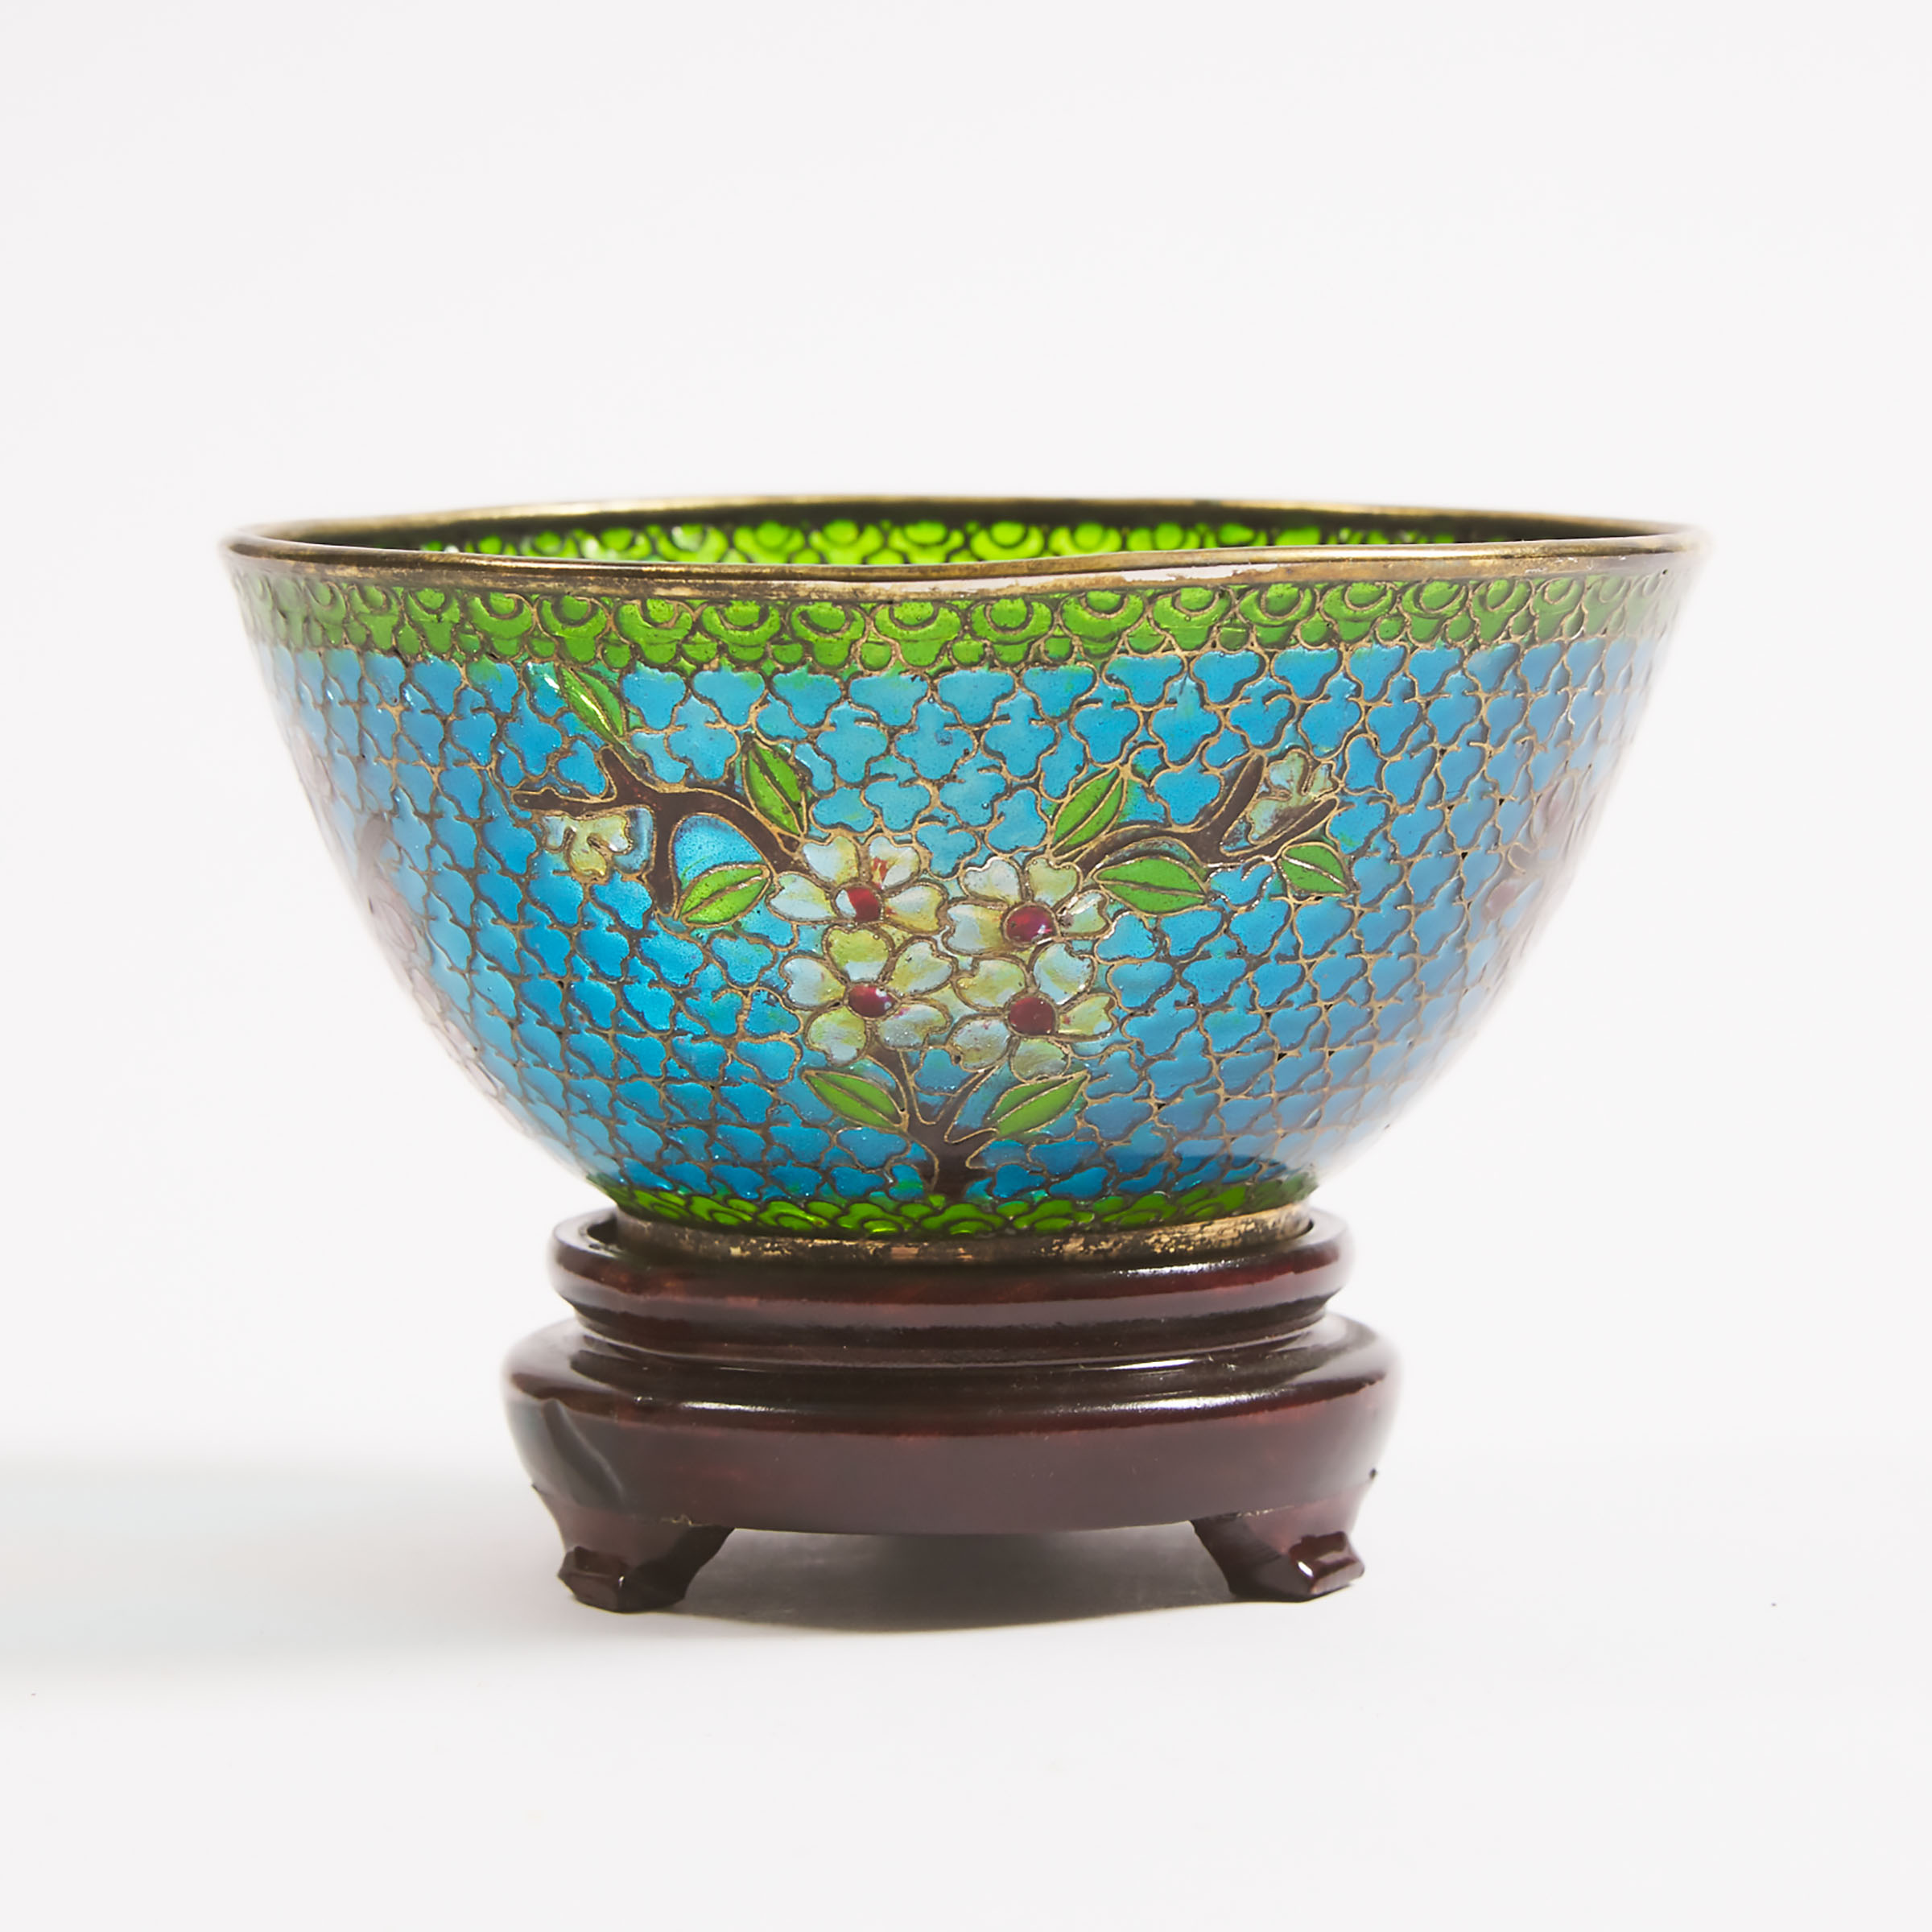 A Chinese Silver-Gilt and Plique-à-Jour Enamel Bowl, Early 20th Century